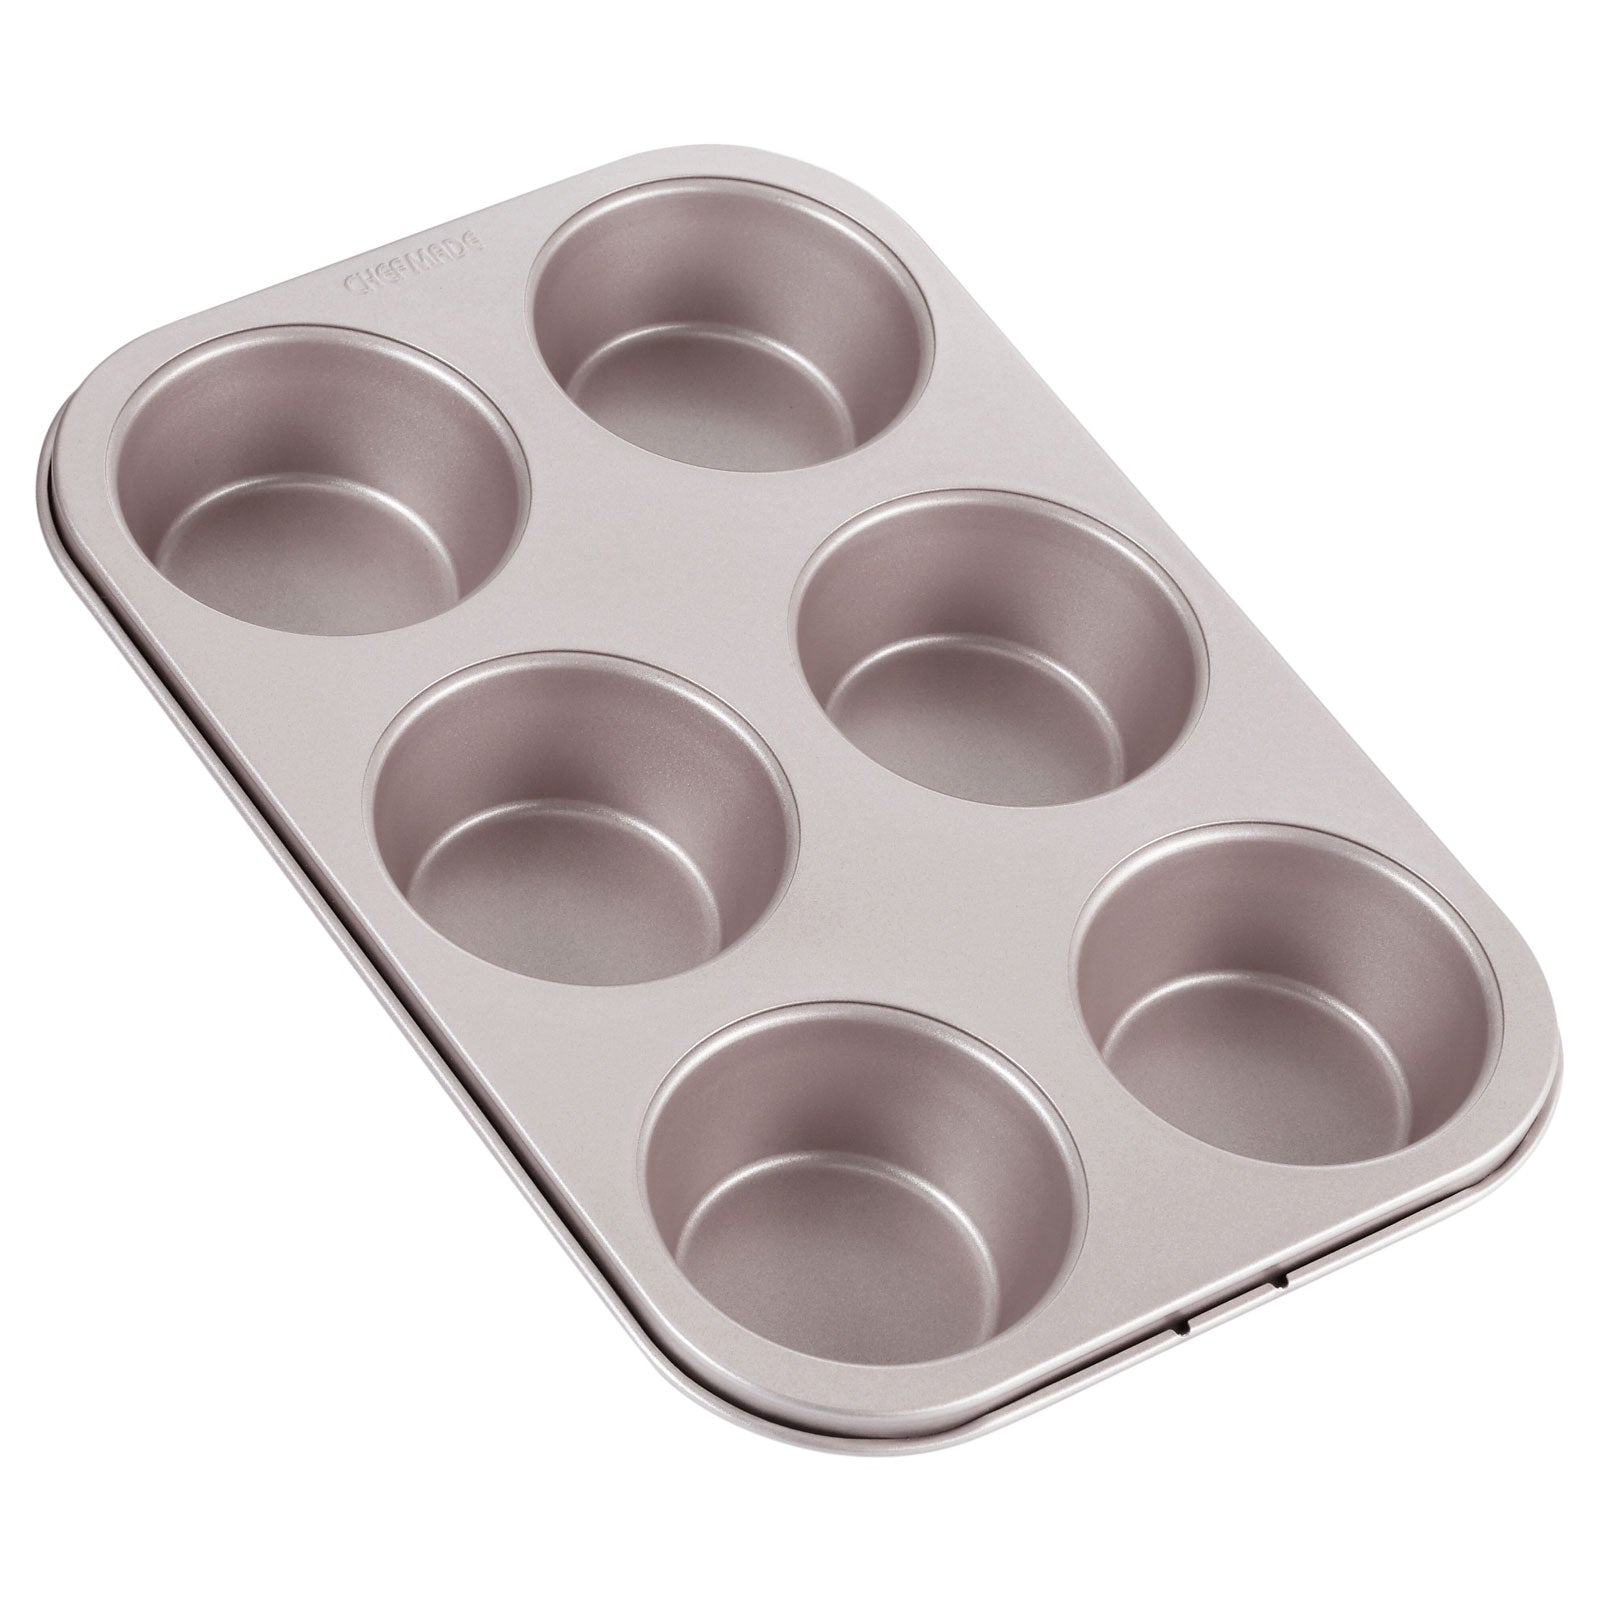 at Home Jumbo 6 Cup Muffin Pan